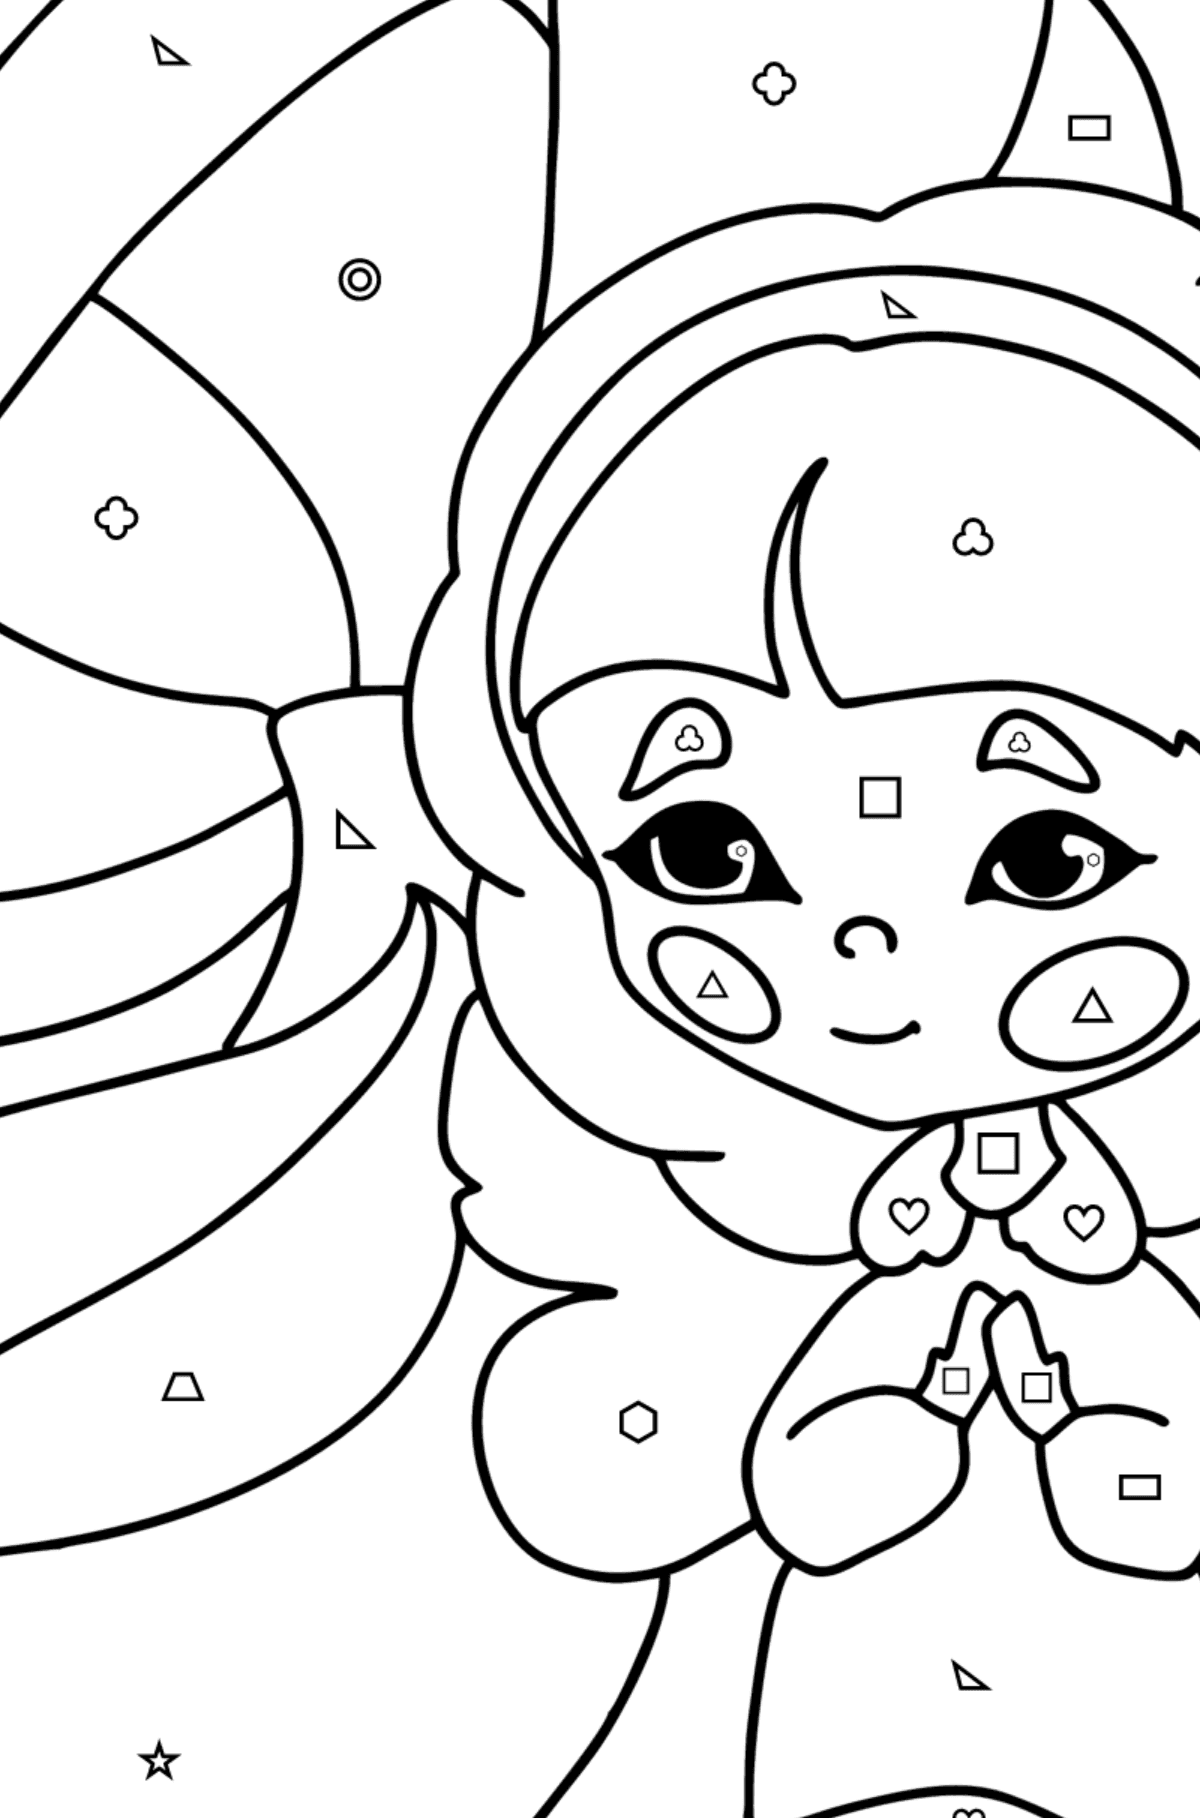 fairy and mushroom coloring page - Coloring by Geometric Shapes for Kids